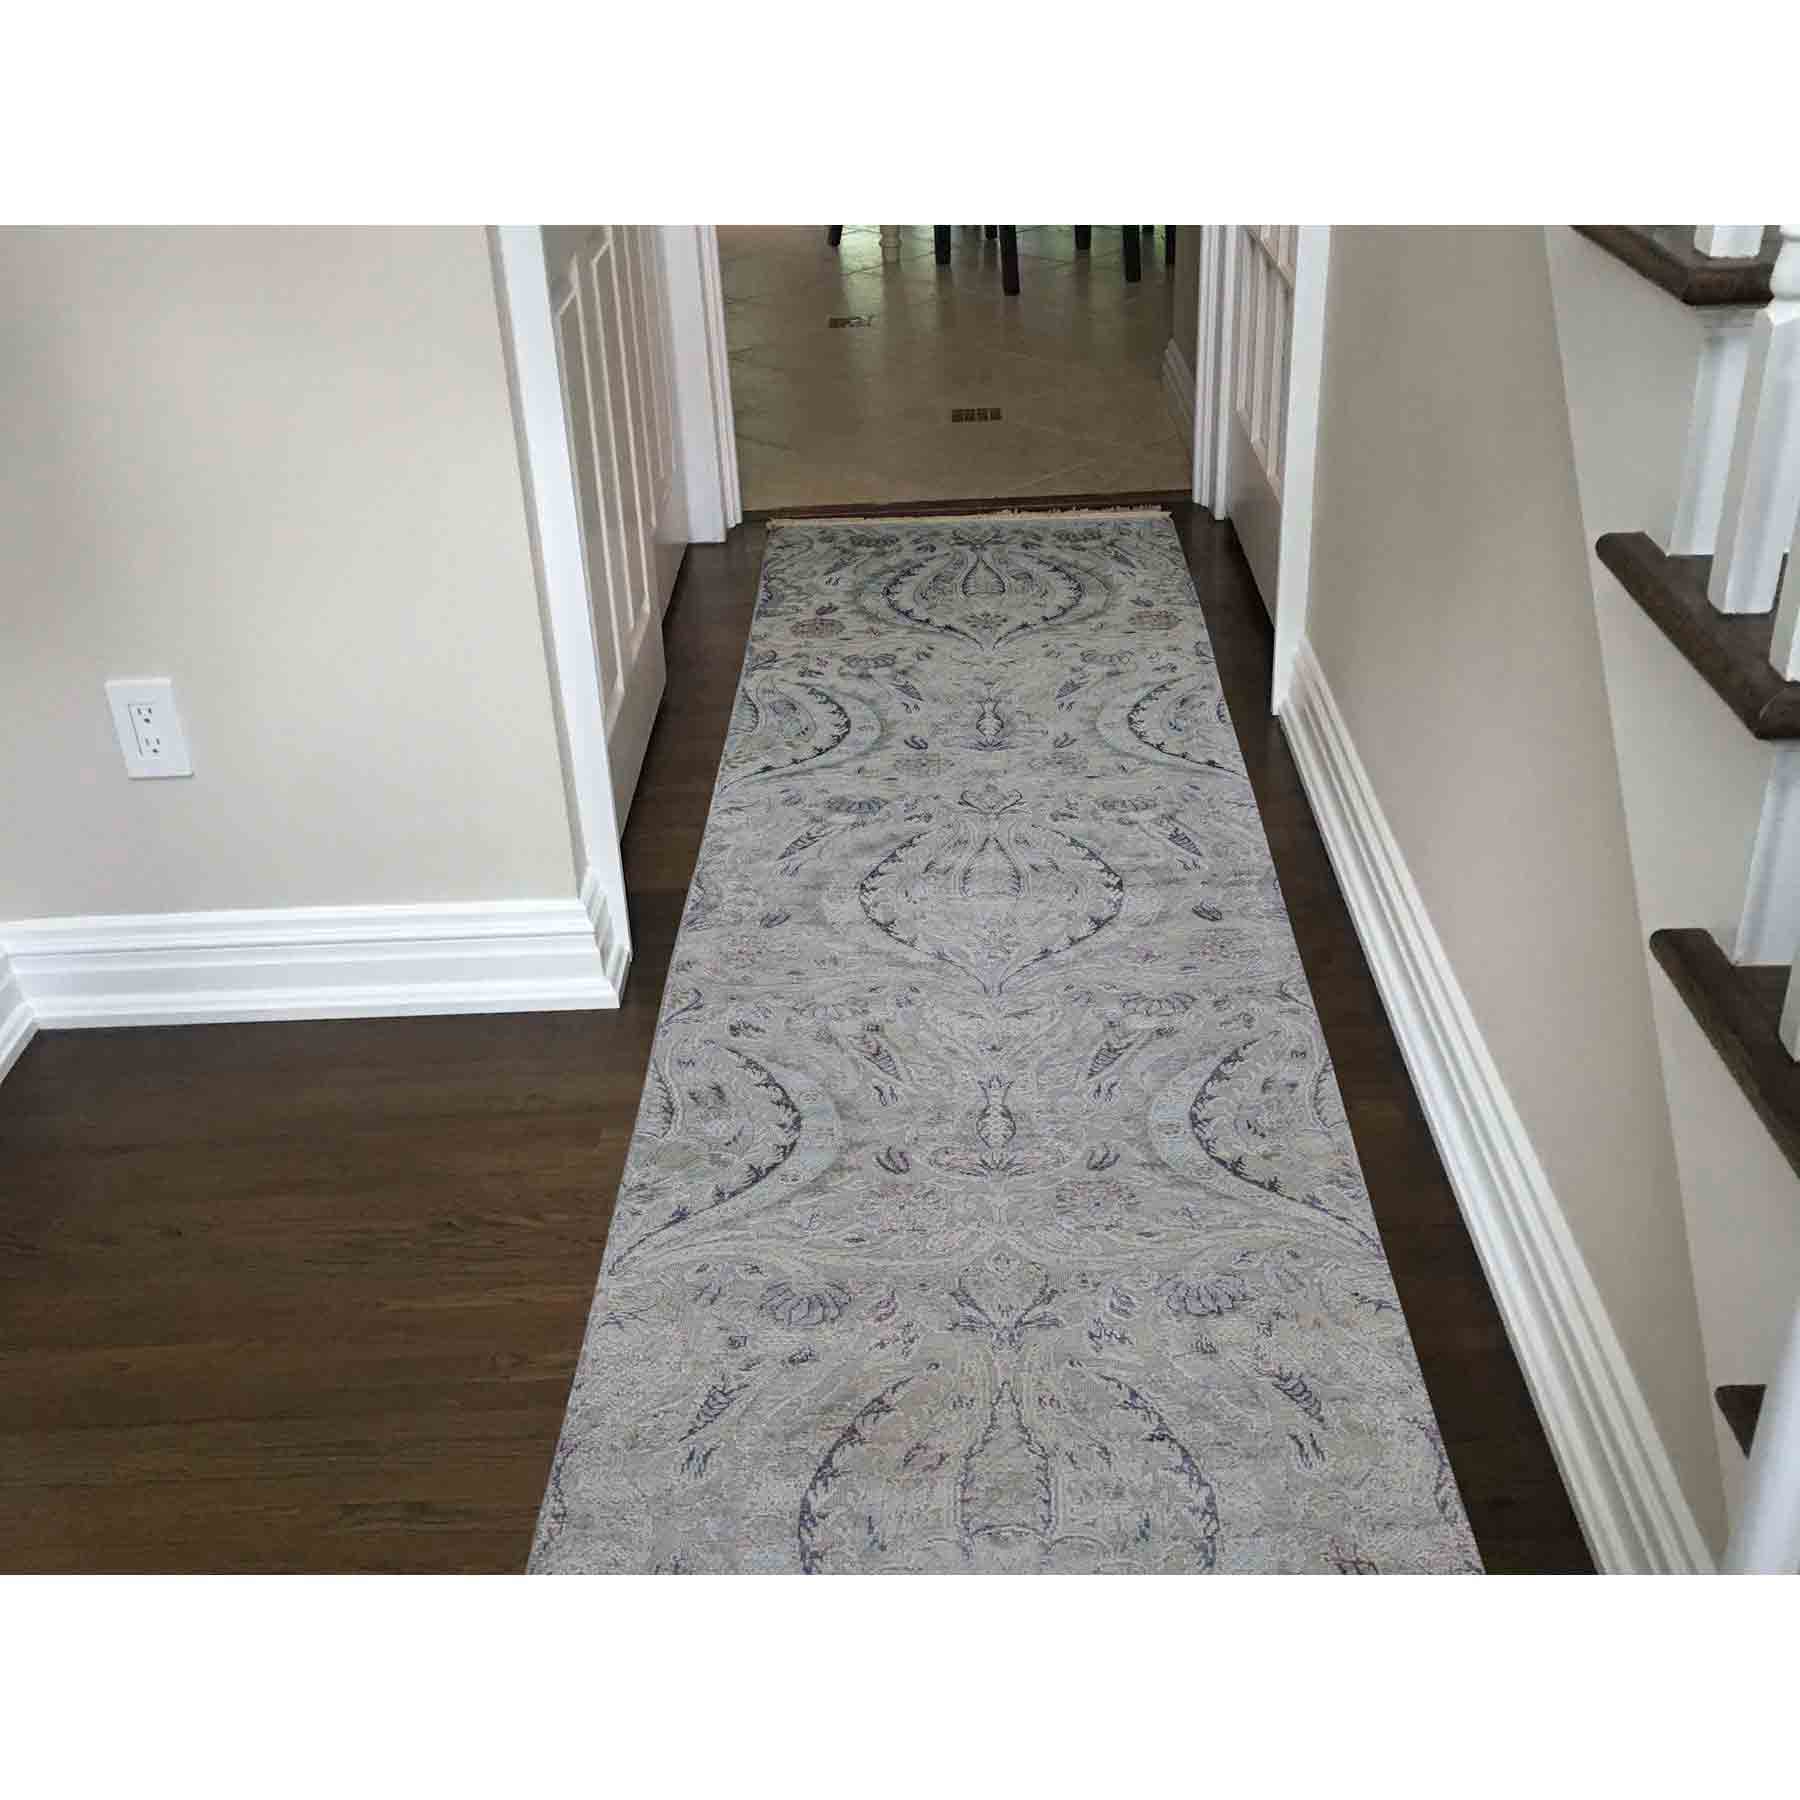 Modern-and-Contemporary-Hand-Knotted-Rug-207445